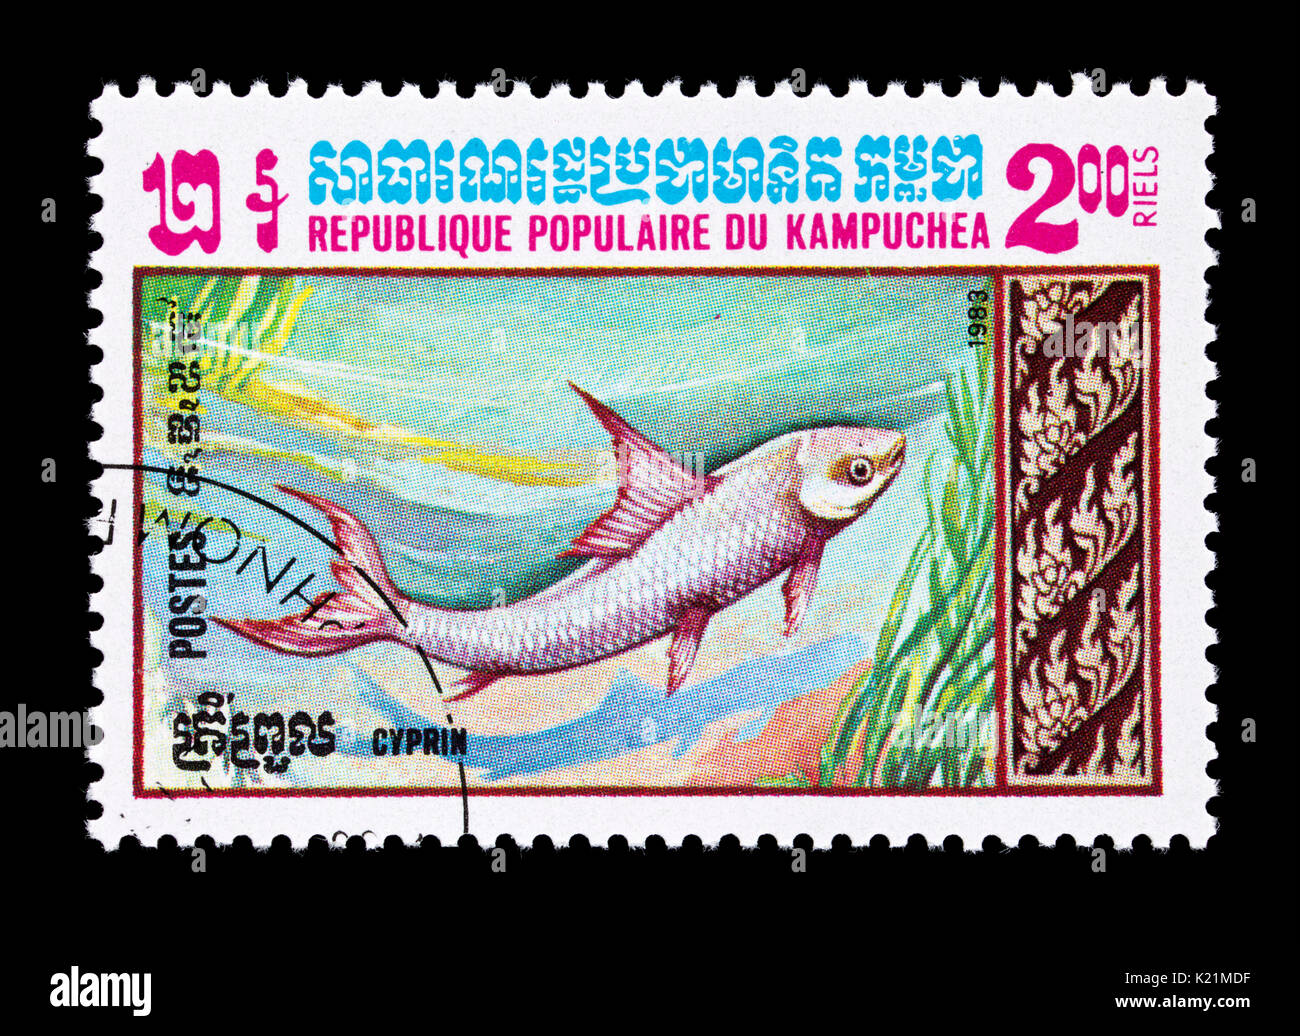 Postage stamp from Cambodia (Kampuchea) depicting a cyprinidae fish species. Stock Photo